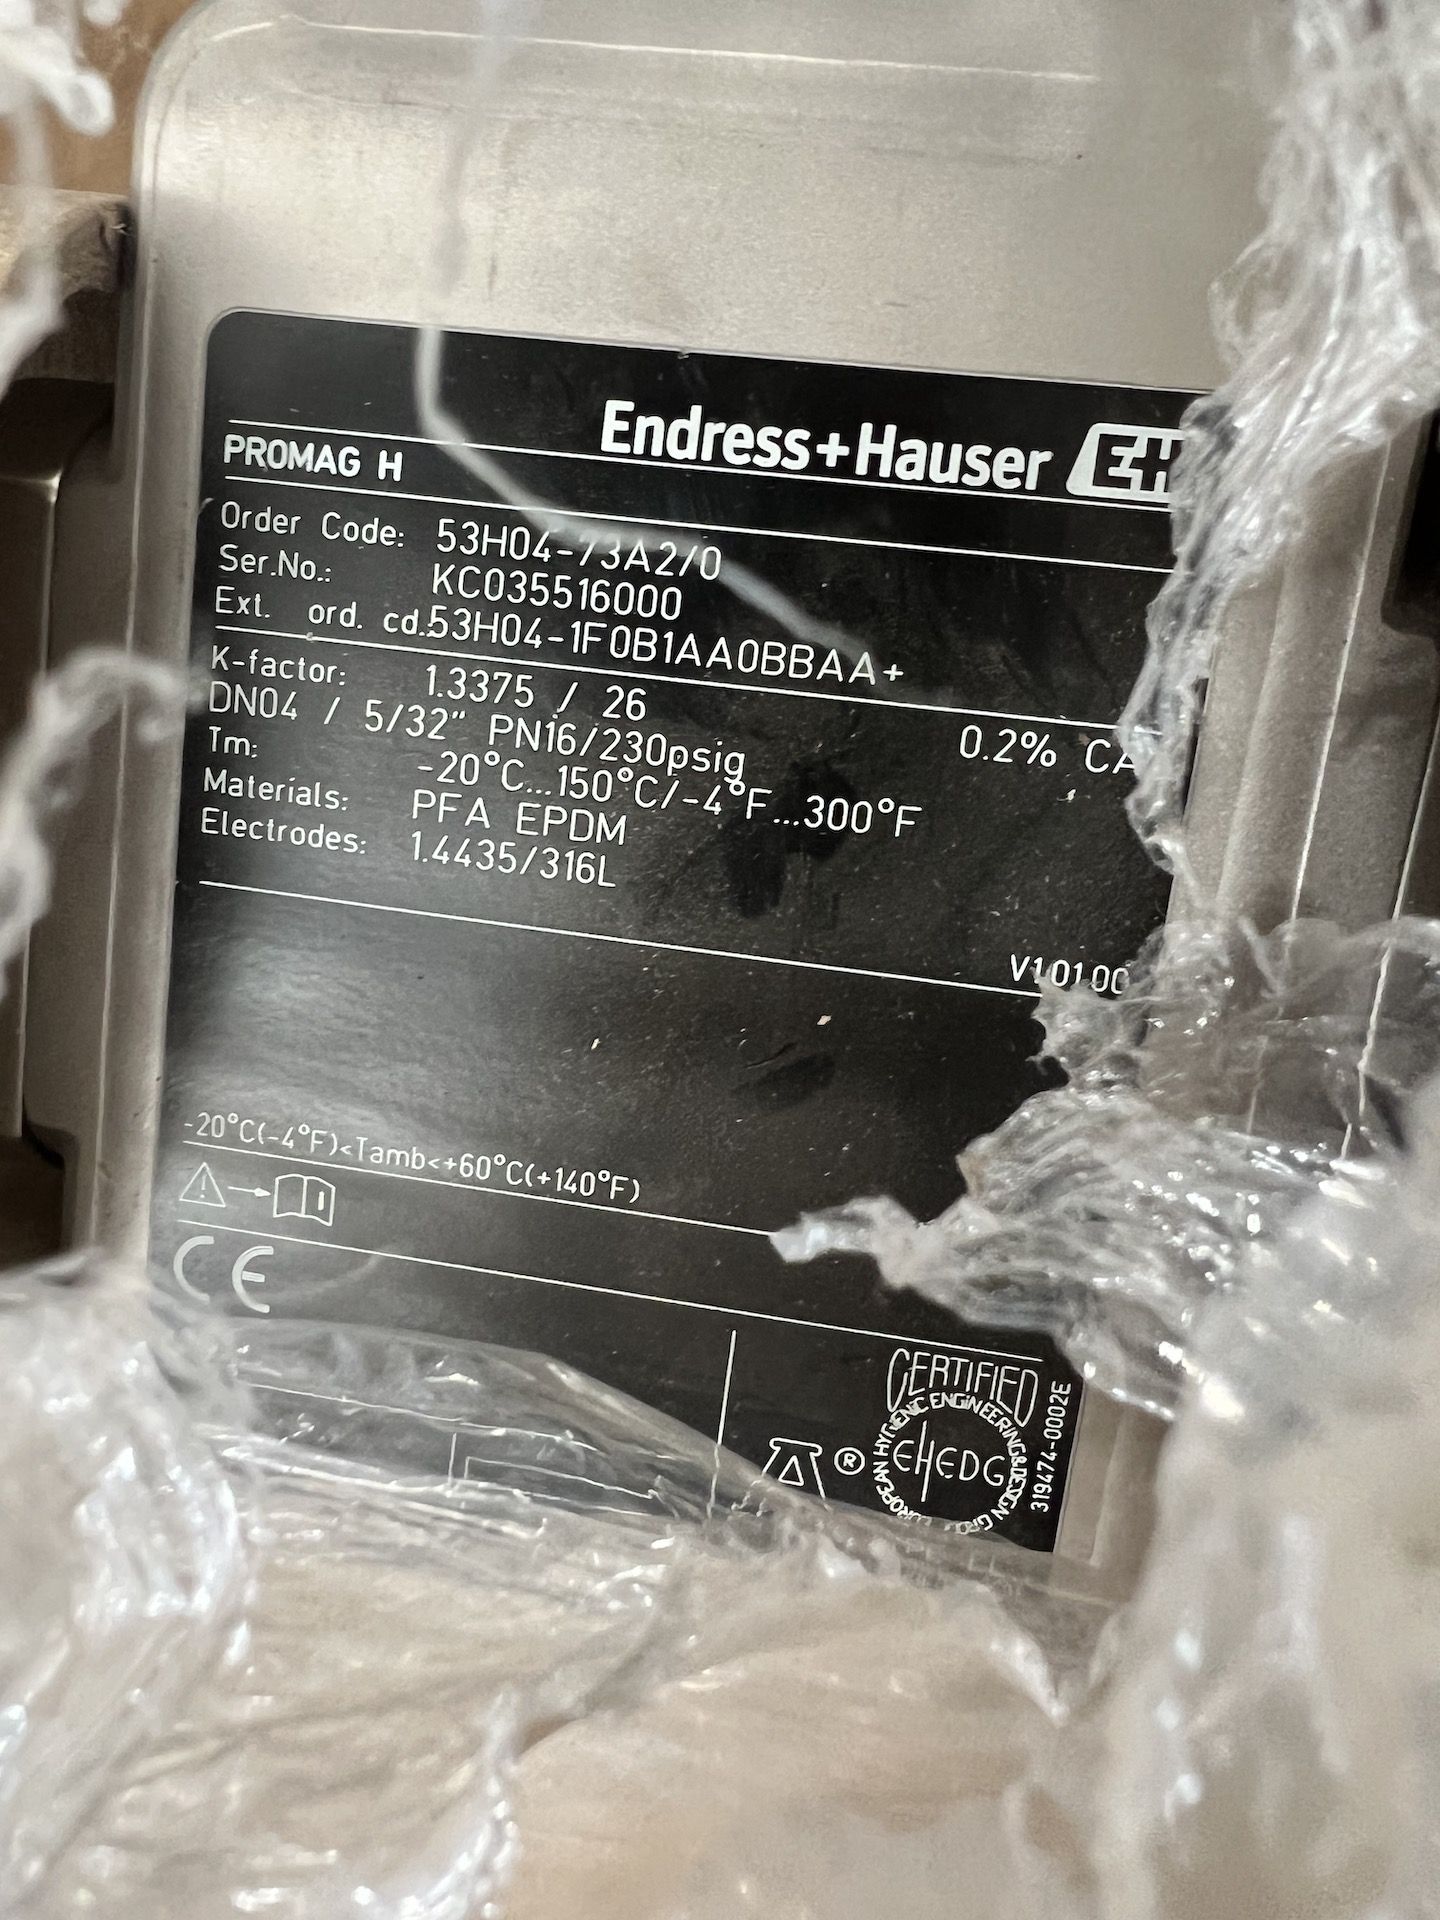 NEW ENDRESS HAUSER FLOW METER (SEE OEM TAG FOR DETAILS) - Image 2 of 3